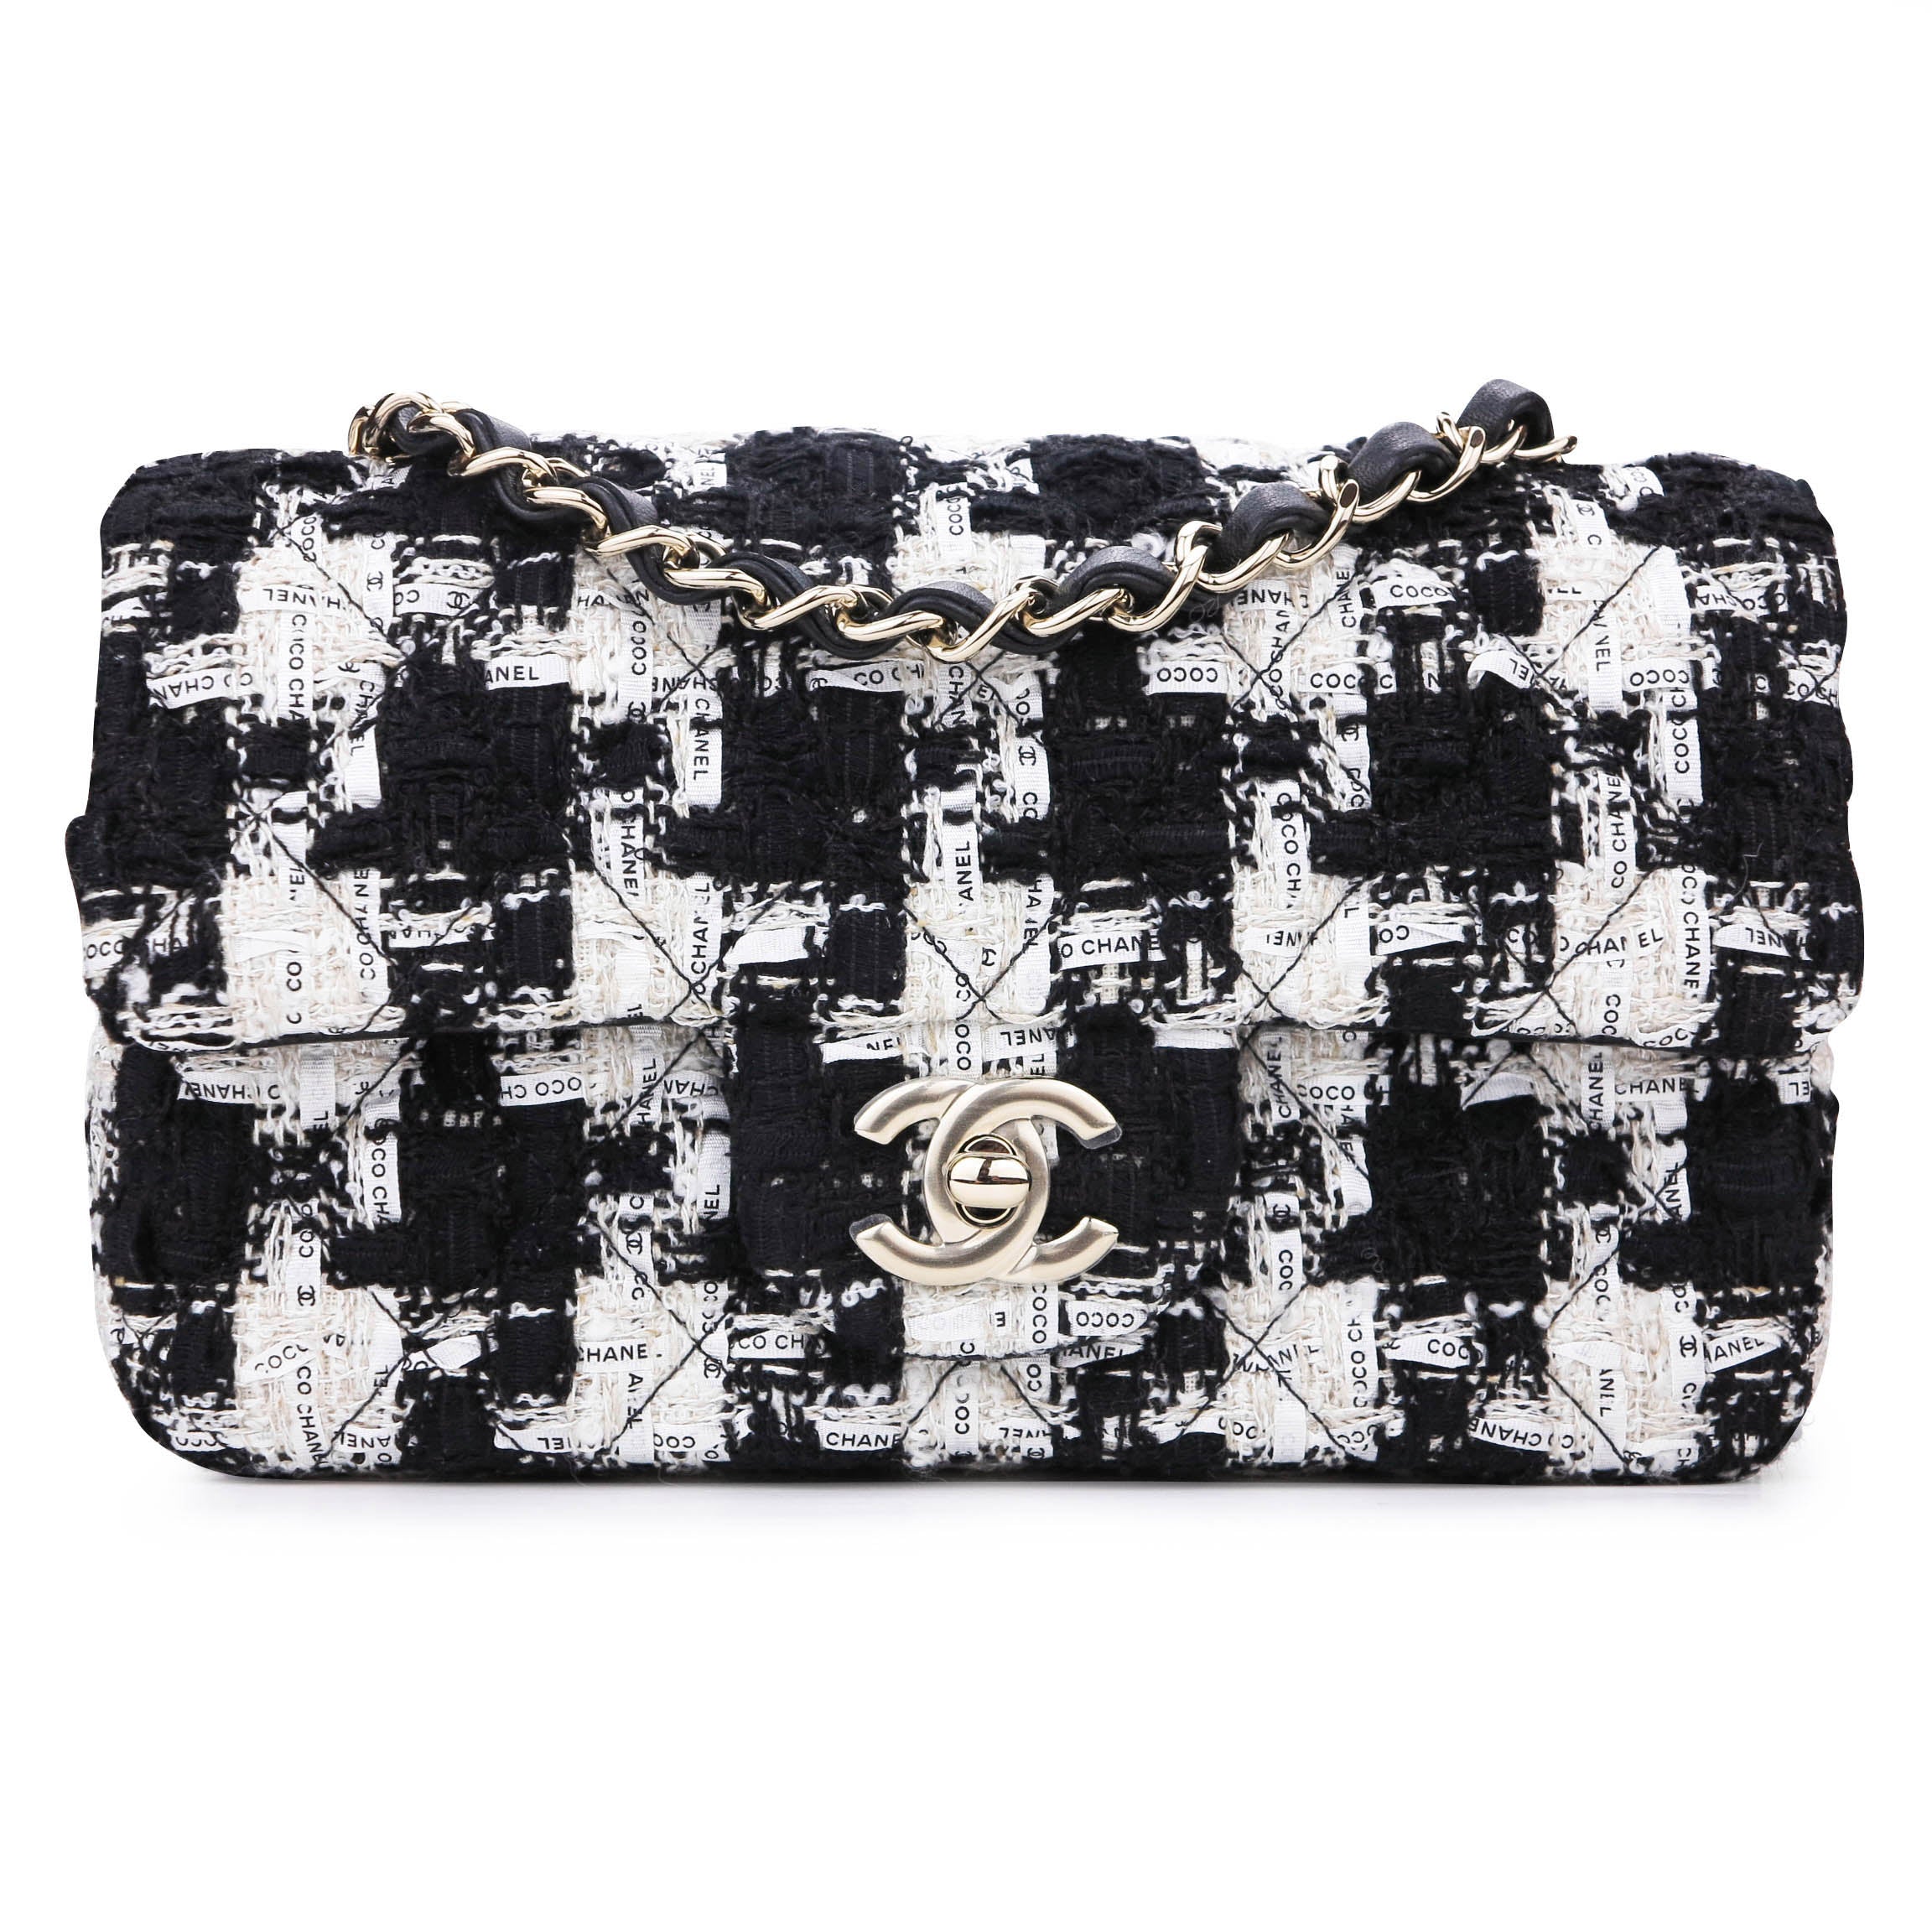 CHANEL 20SS Houndstooth Tweed Mini Rectangular Flap Bag in Black and White